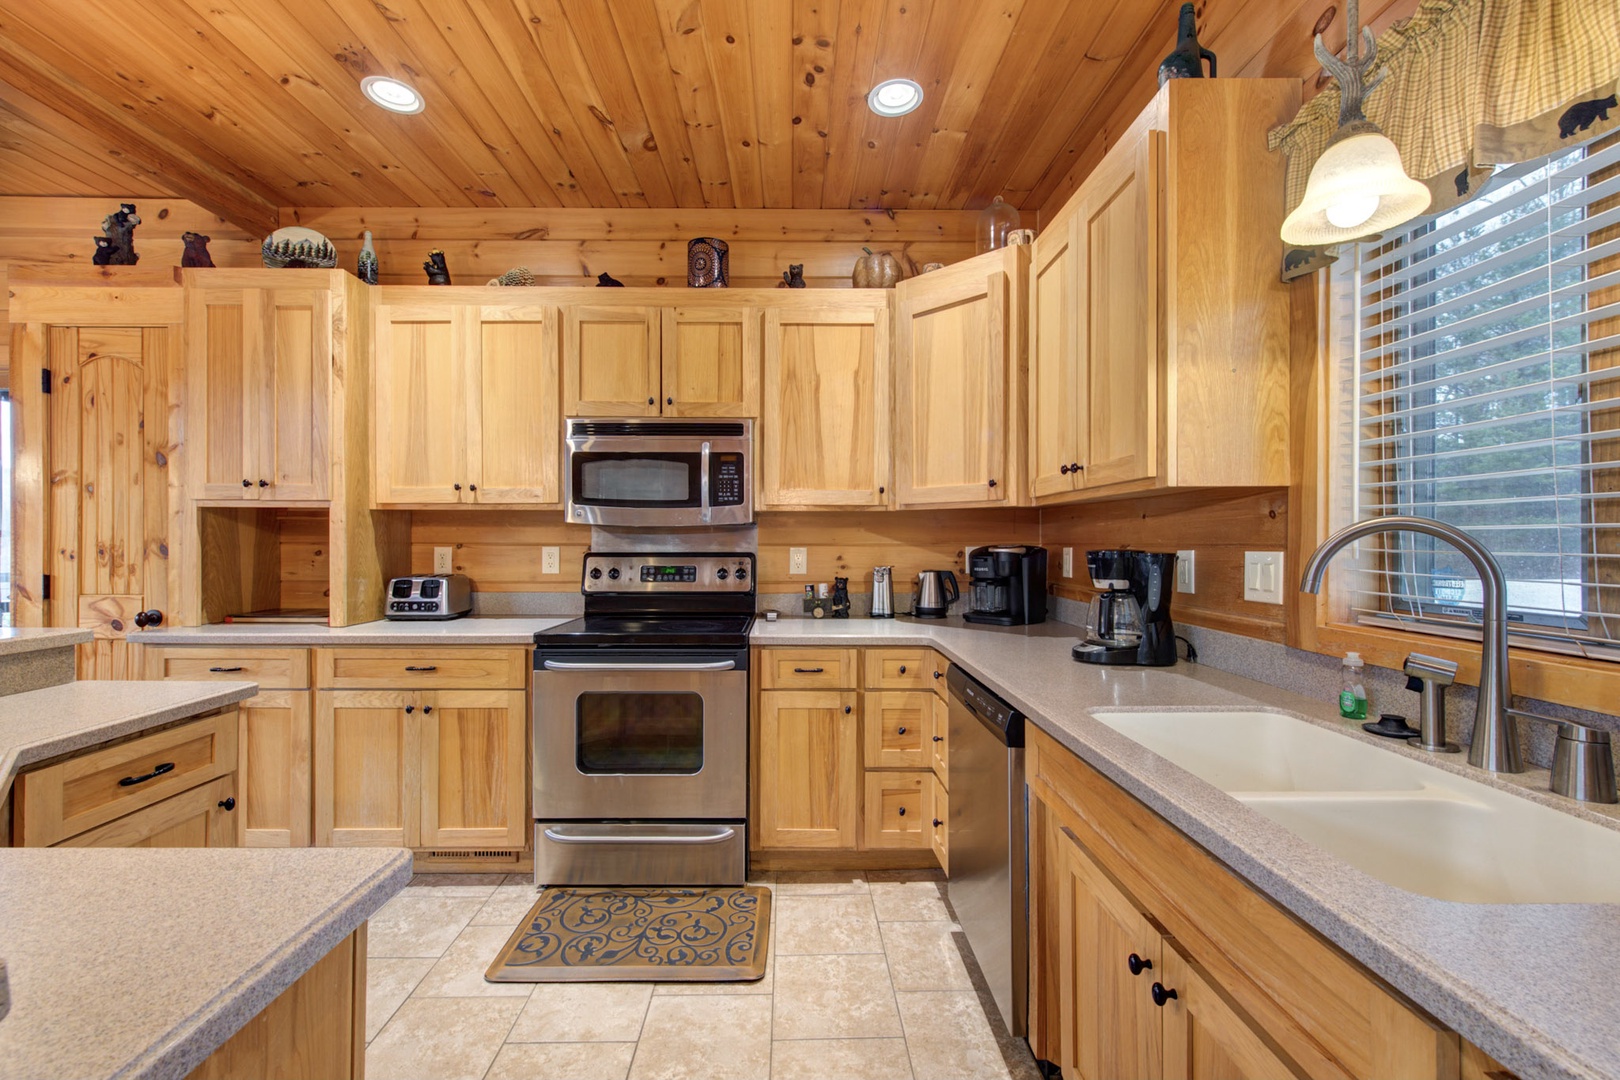 The welcoming kitchen offers ample space & all the comforts of home